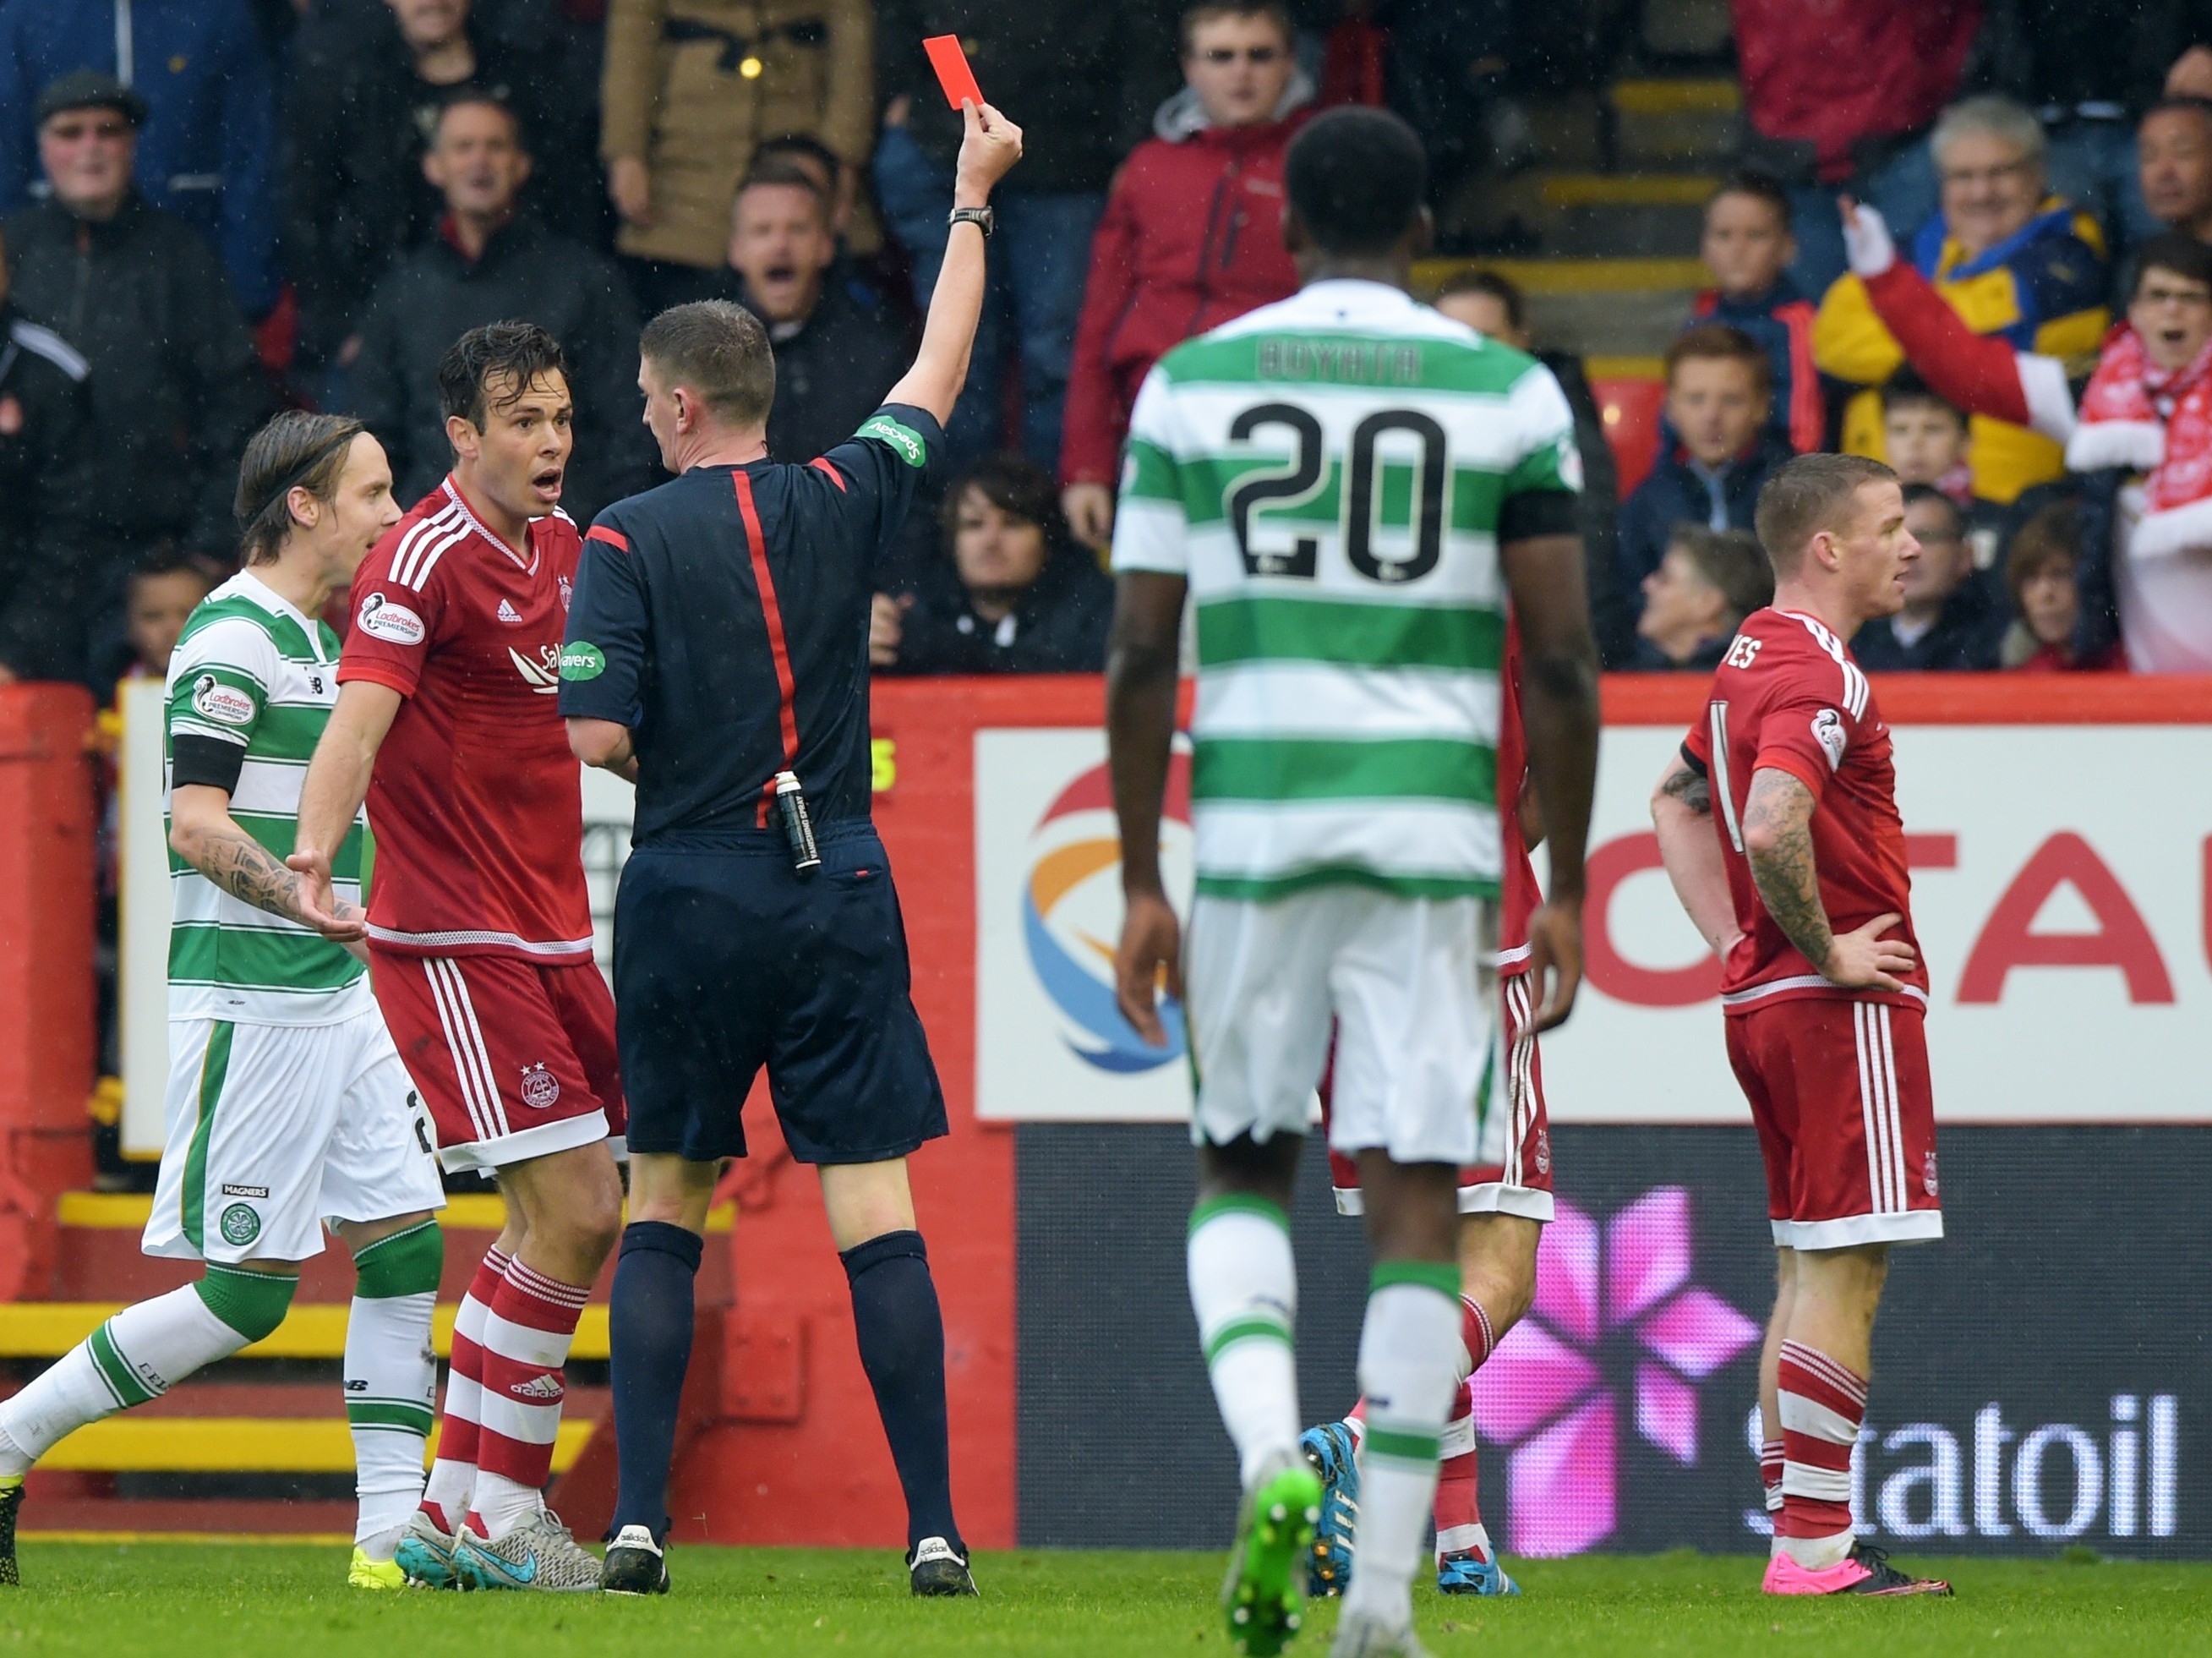 Aberdeen's Jonny Hayes (right) is shown the red card